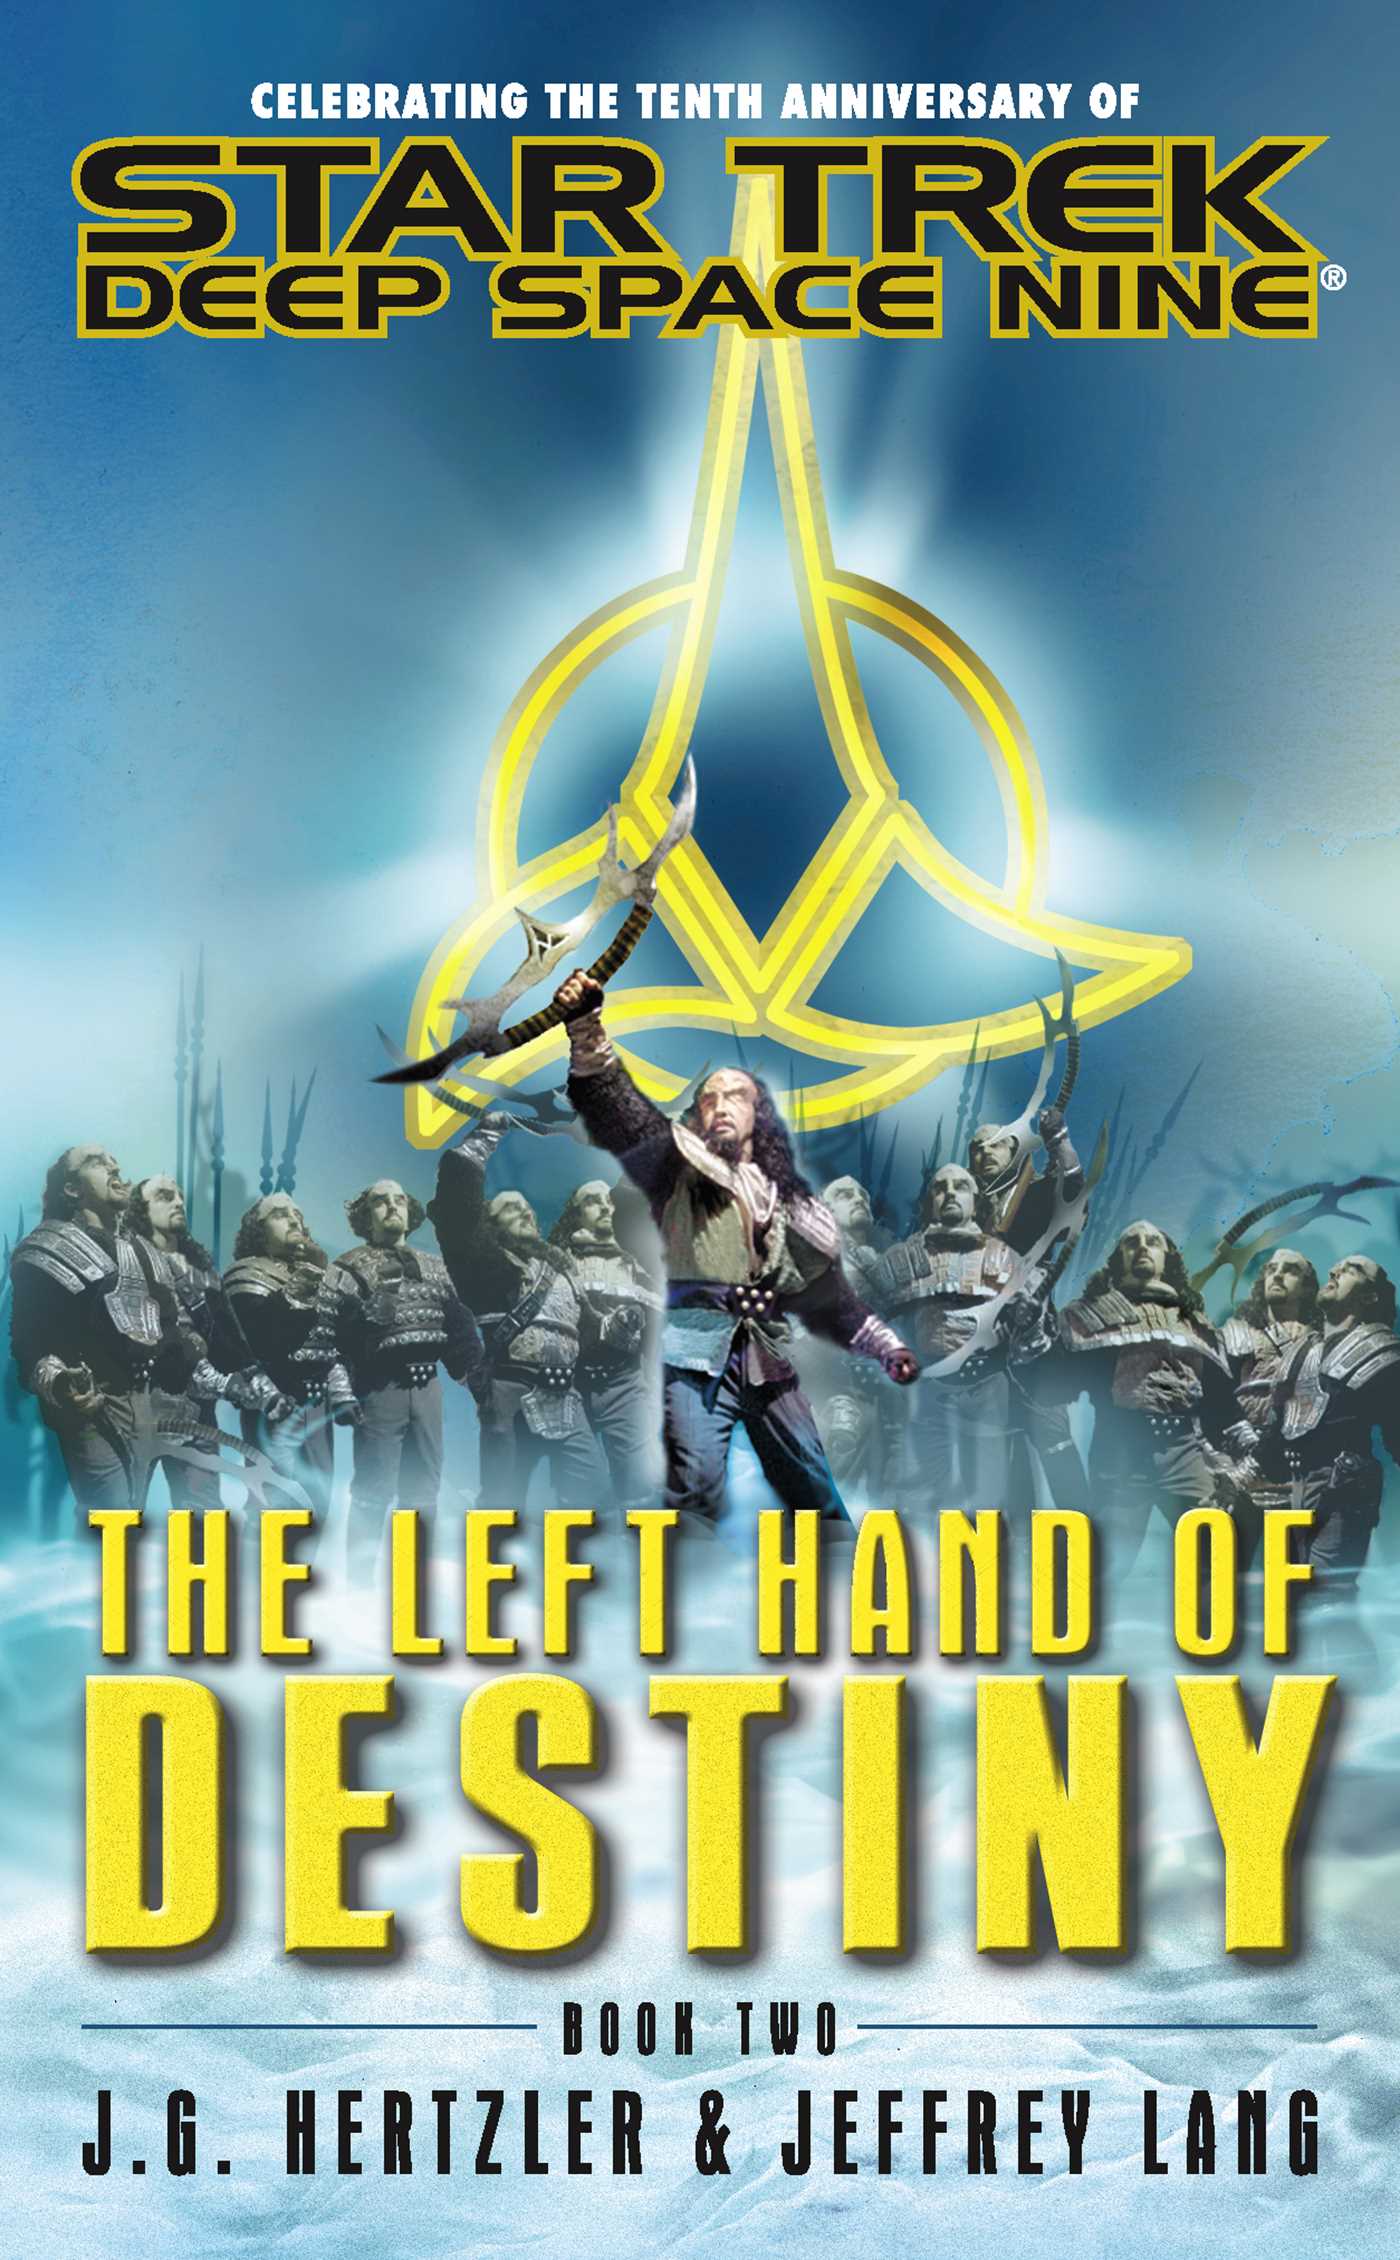 The Left Hand of Destiny Book Two - <10